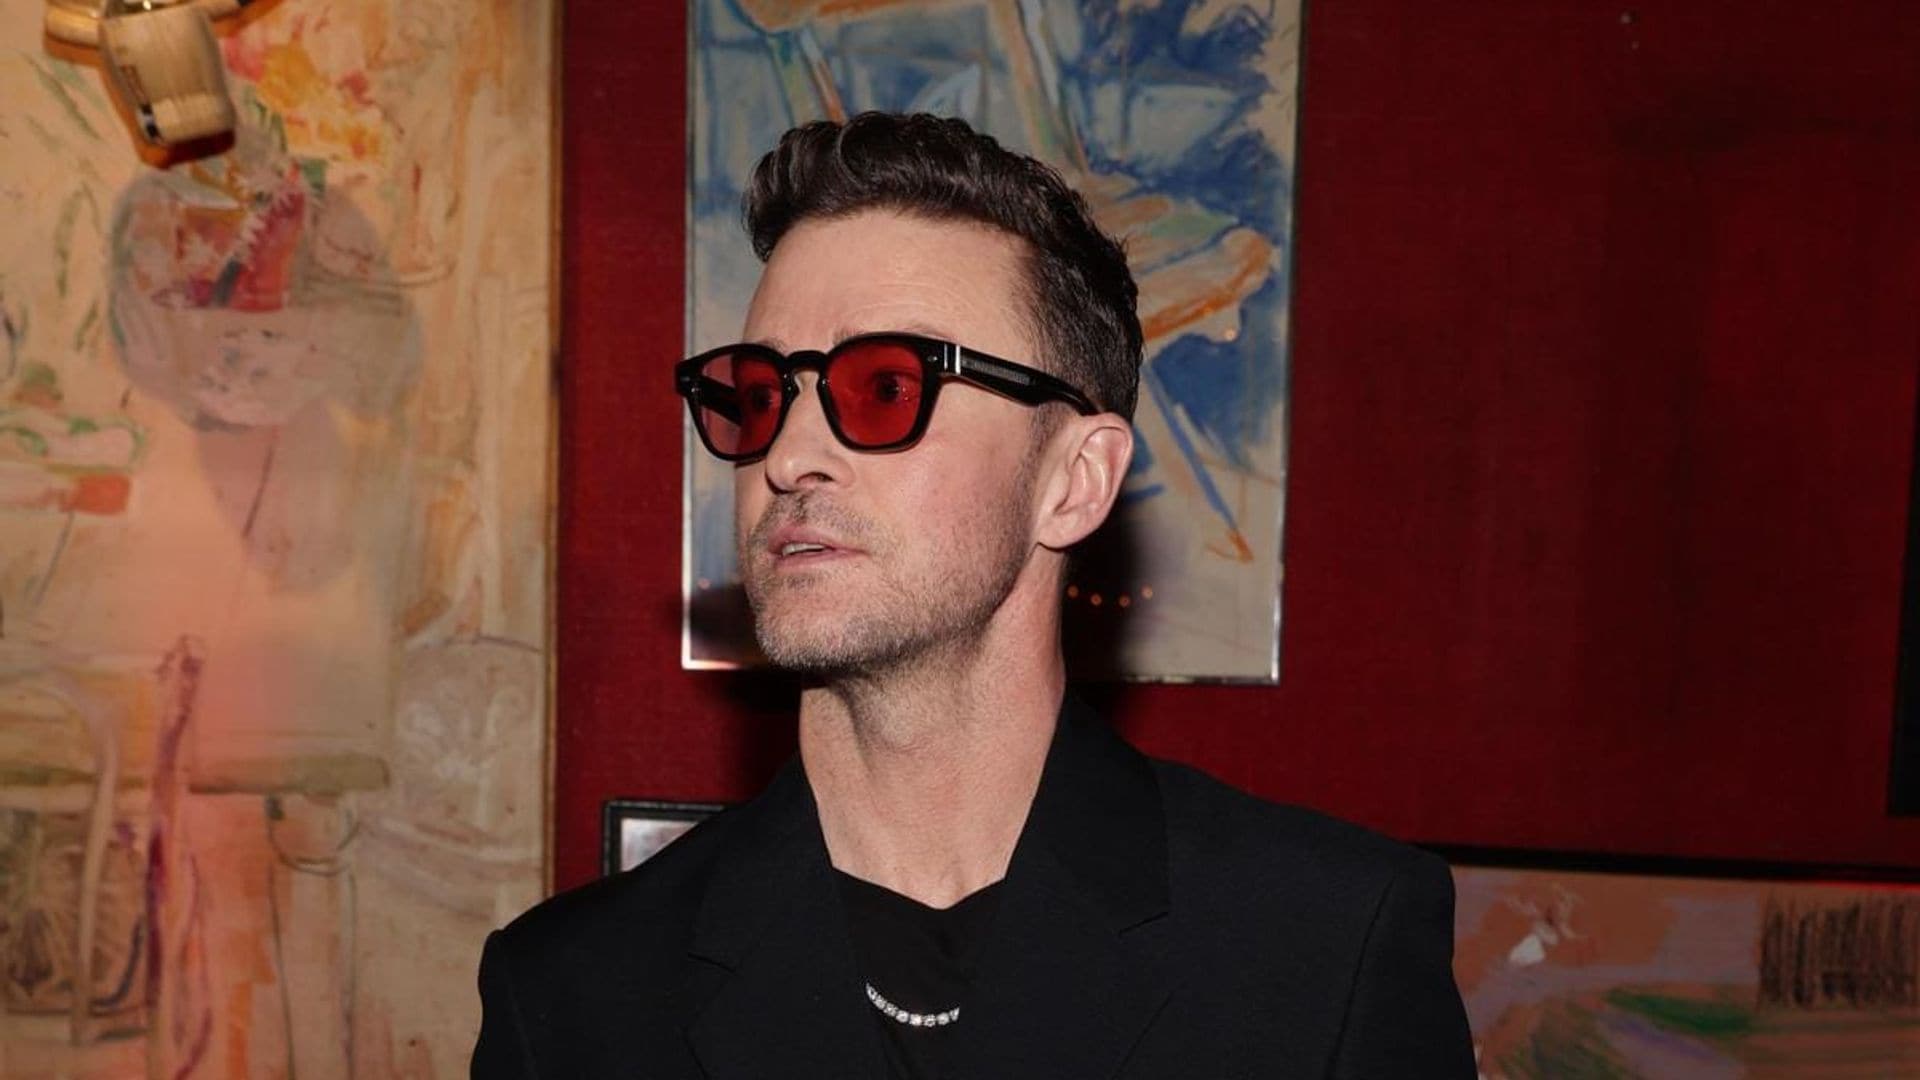 Justin Timberlake was arrested in New York: What are his charges?